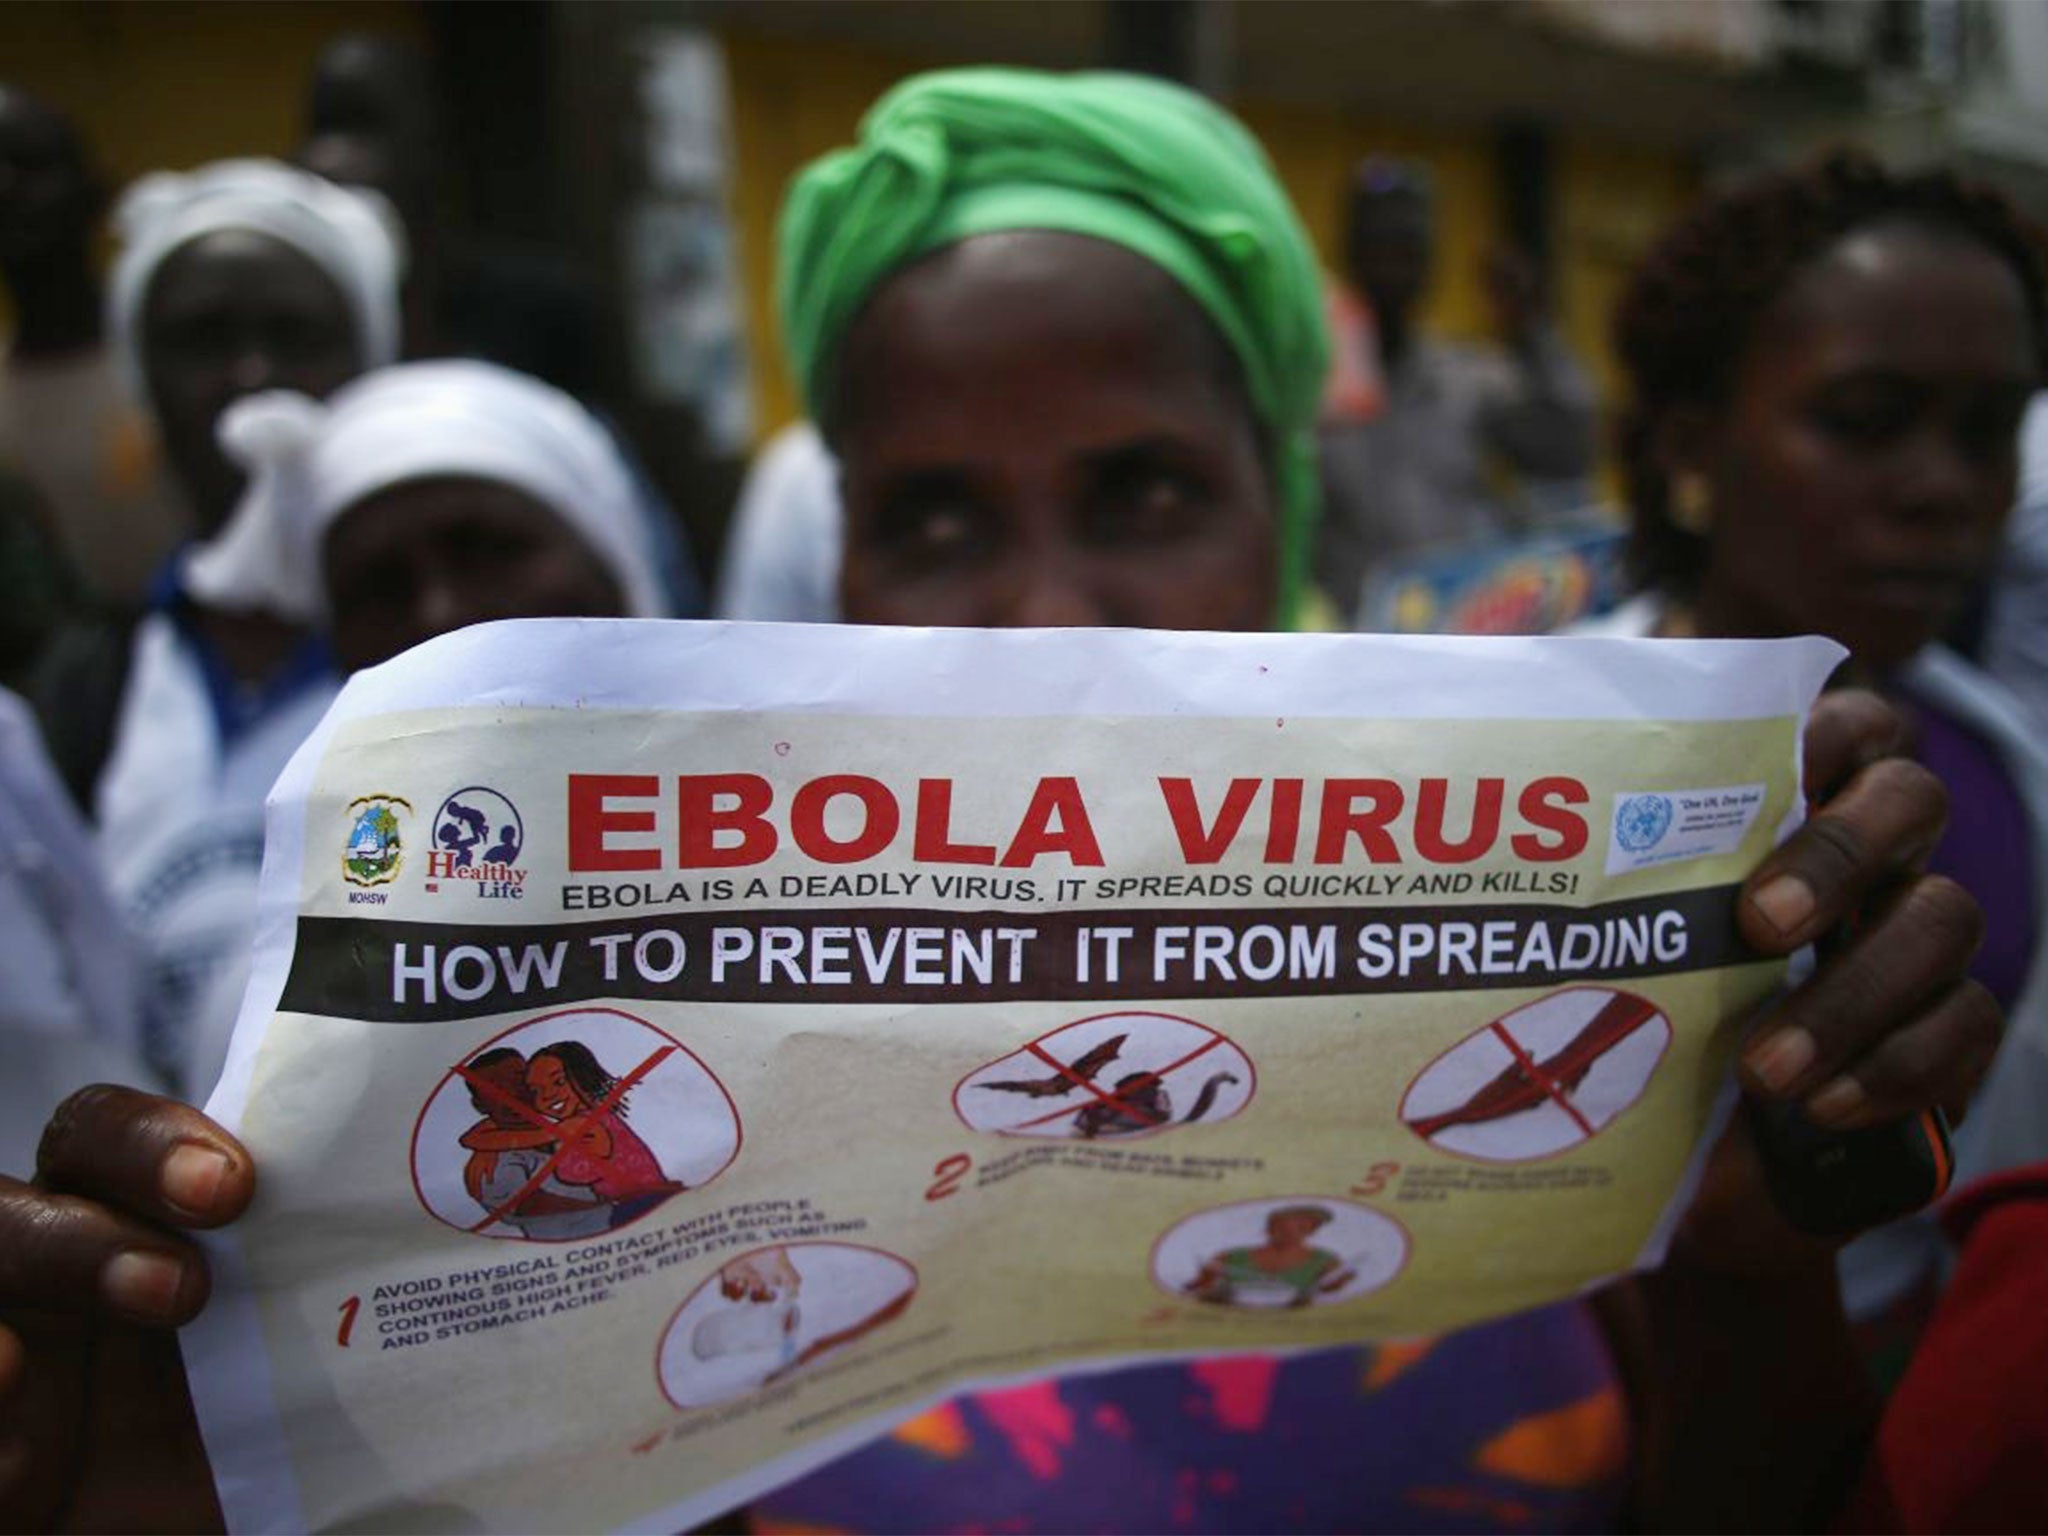 A public health advocate inviting people to an Ebola awareness and prevention event